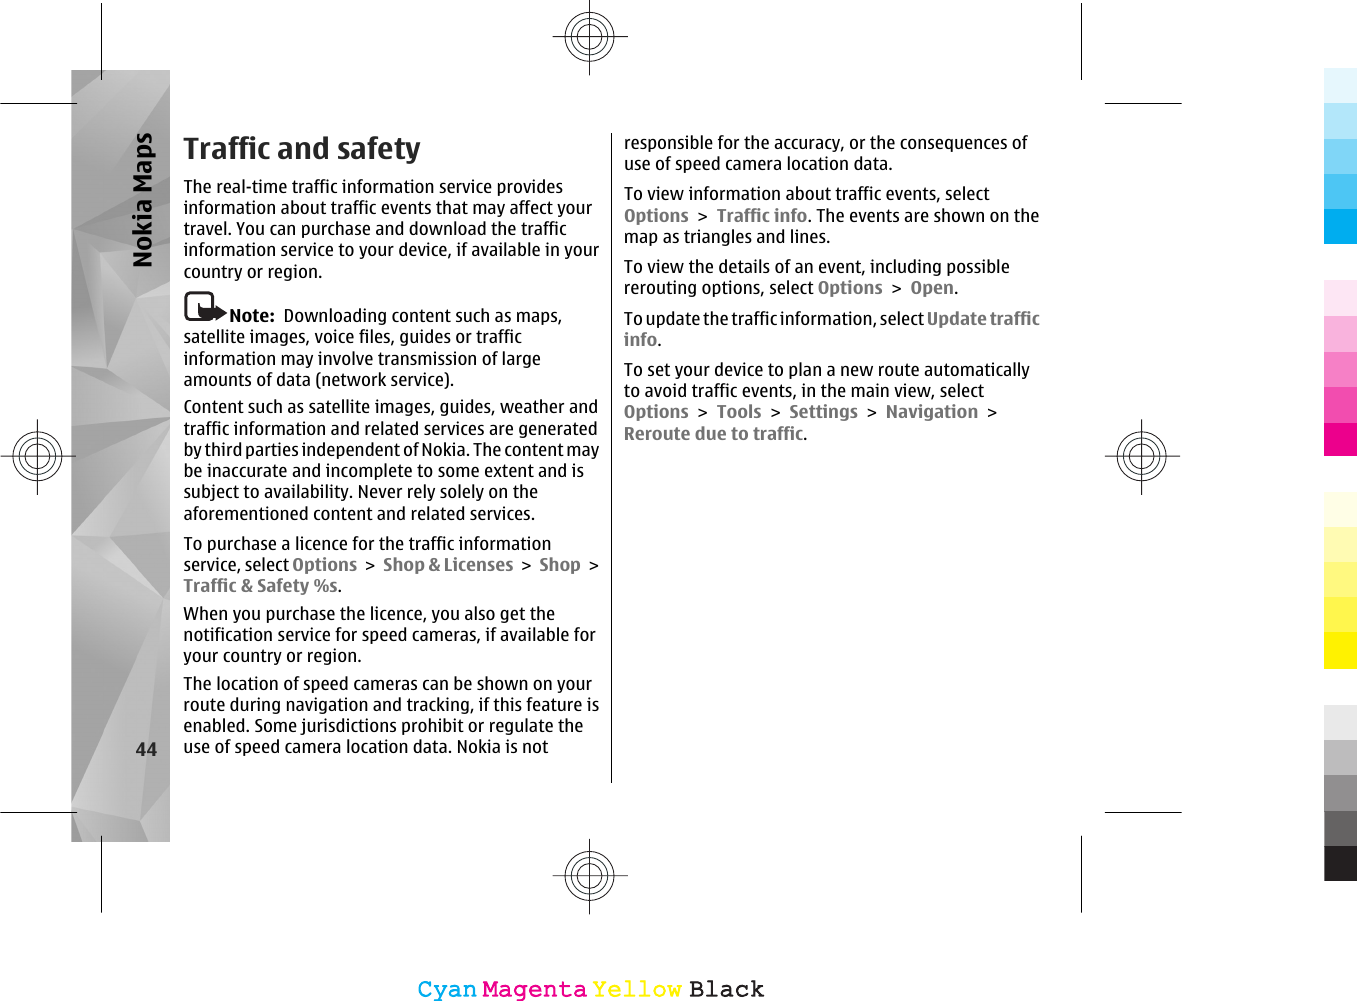 Traffic and safetyThe real-time traffic information service providesinformation about traffic events that may affect yourtravel. You can purchase and download the trafficinformation service to your device, if available in yourcountry or region.Note:  Downloading content such as maps,satellite images, voice files, guides or trafficinformation may involve transmission of largeamounts of data (network service).Content such as satellite images, guides, weather andtraffic information and related services are generatedby third parties independent of Nokia. The content maybe inaccurate and incomplete to some extent and issubject to availability. Never rely solely on theaforementioned content and related services.To purchase a licence for the traffic informationservice, select Options &gt; Shop &amp; Licenses &gt; Shop &gt;Traffic &amp; Safety %s.When you purchase the licence, you also get thenotification service for speed cameras, if available foryour country or region.The location of speed cameras can be shown on yourroute during navigation and tracking, if this feature isenabled. Some jurisdictions prohibit or regulate theuse of speed camera location data. Nokia is notresponsible for the accuracy, or the consequences ofuse of speed camera location data.To view information about traffic events, selectOptions &gt; Traffic info. The events are shown on themap as triangles and lines.To view the details of an event, including possiblererouting options, select Options &gt; Open.To update the traffic information, select Update trafficinfo.To set your device to plan a new route automaticallyto avoid traffic events, in the main view, selectOptions &gt; Tools &gt; Settings &gt; Navigation &gt;Reroute due to traffic.44Nokia MapsCyanCyanMagentaMagentaYellowYellowBlackBlack